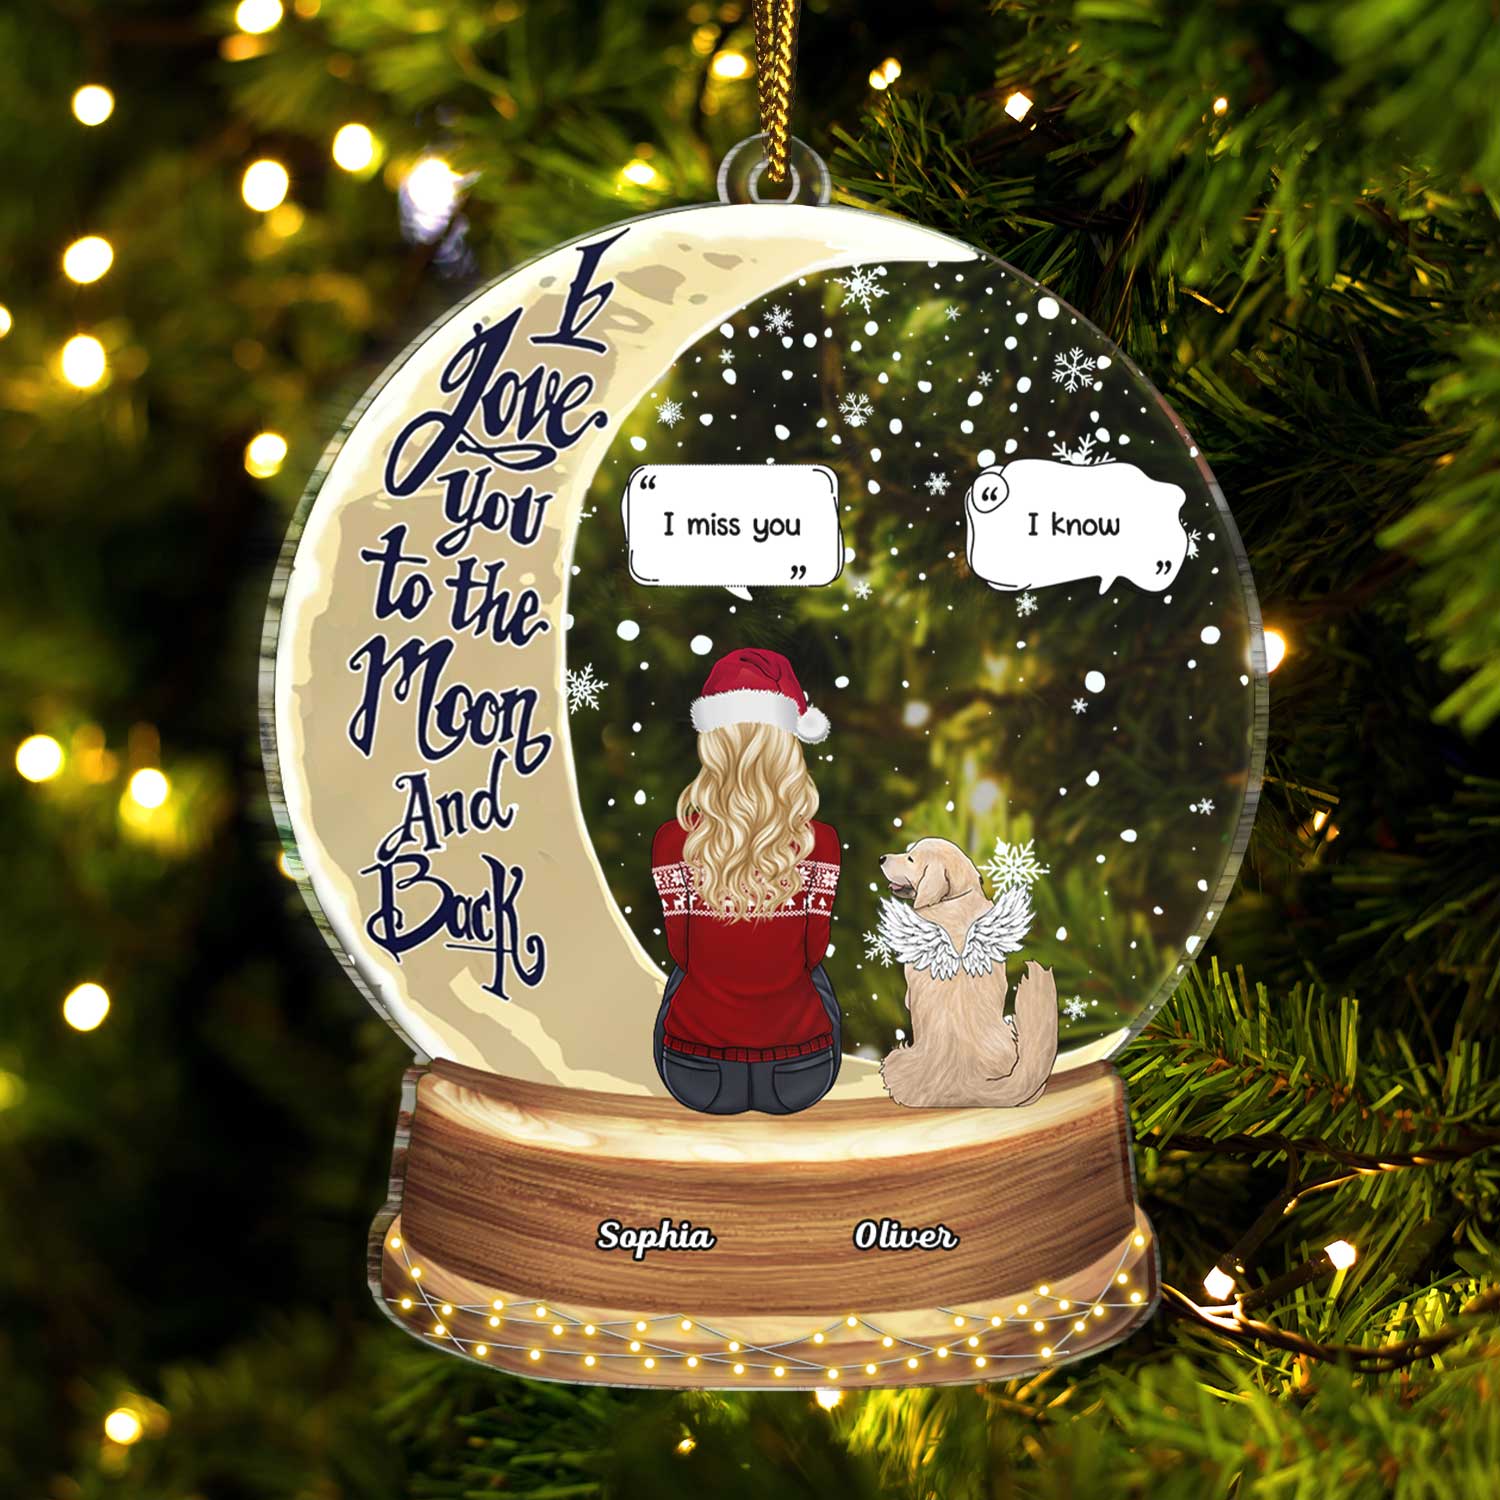 Snow Globe Love You To The Moon & Back - Christmas Keepsake, Sympathy Gift, Pet Memorial Gift - Personalized Custom Shaped Acrylic Ornament